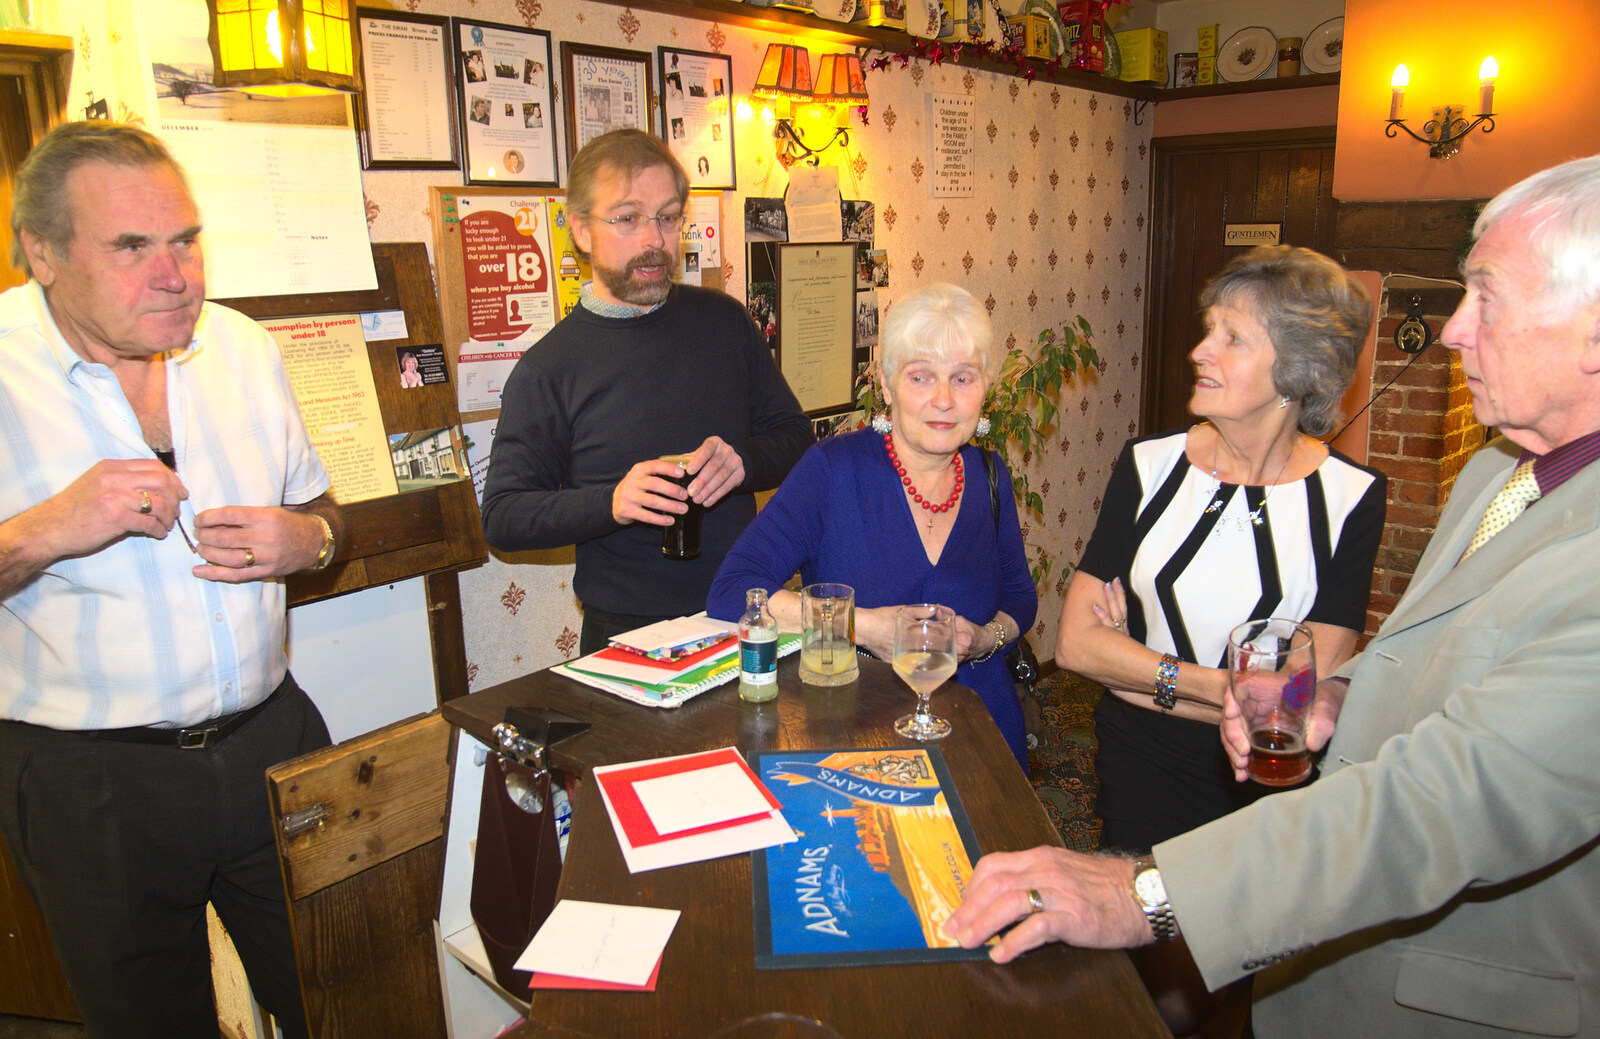 Christmas cards are handed out from The BSCC Christmas Dinner, The Swan Inn, Brome, Suffolk - 6th December 2014